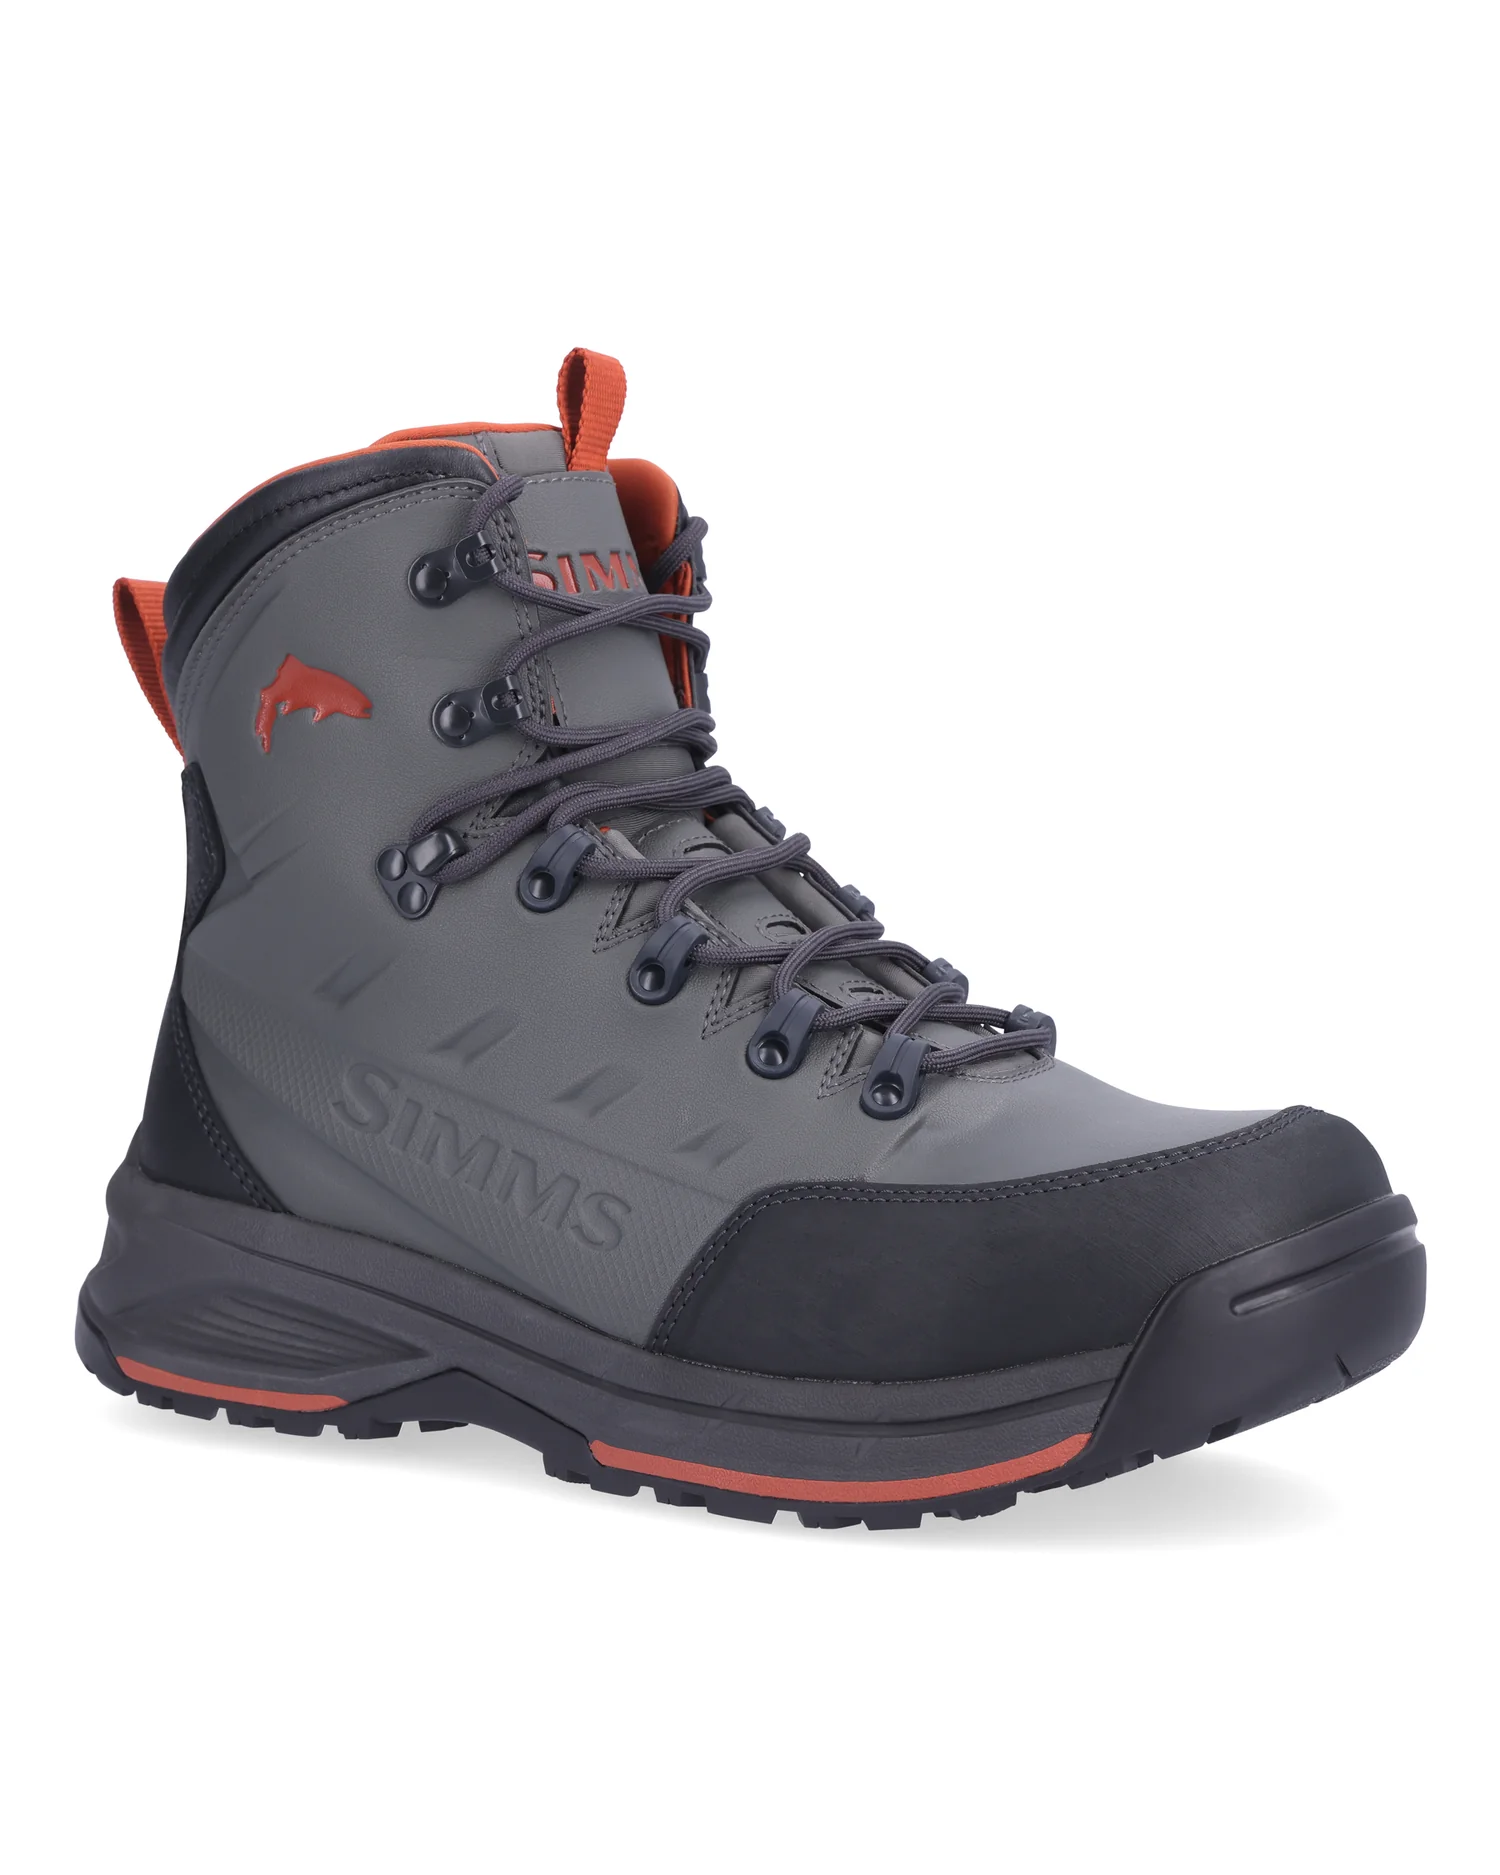 M's Freestone® Wading Boot - Rubber Sole - Rivers & Glen Trading Co.